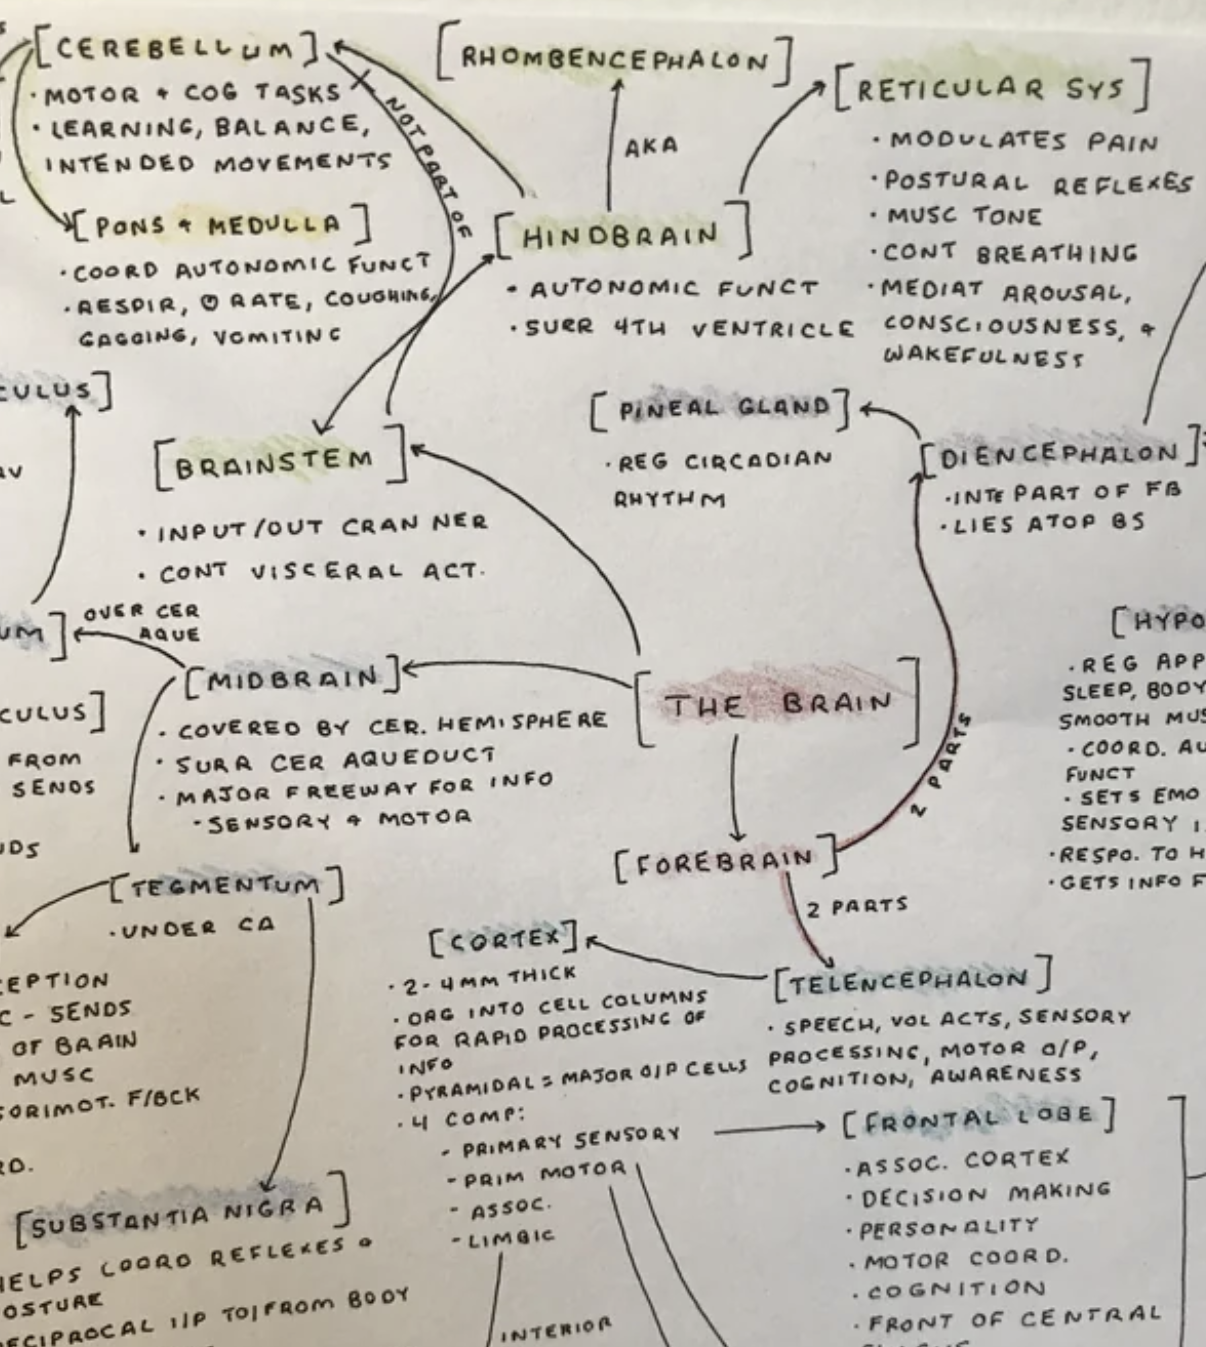 Mindmap example for Neuroanatomy from one of the medical students of the community